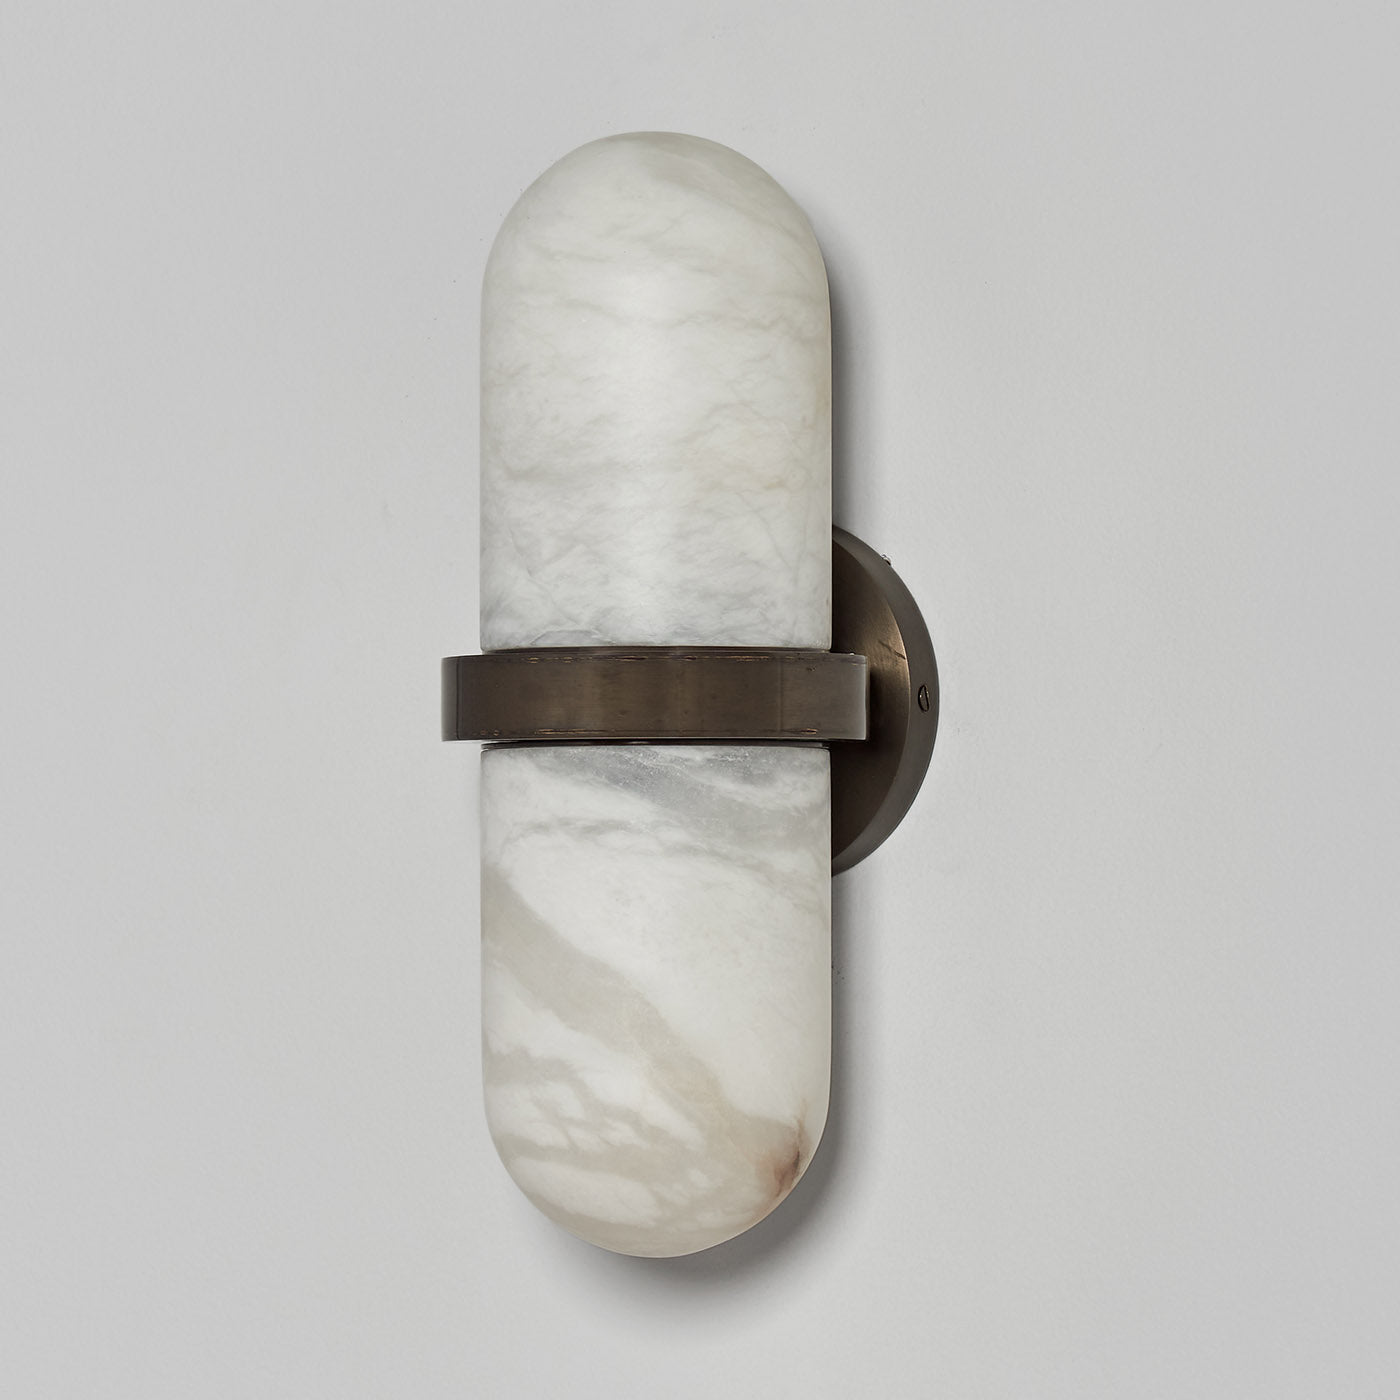 "Pill" Wall Sconce in Bronze by Droulers Architecture - Alternative view 2